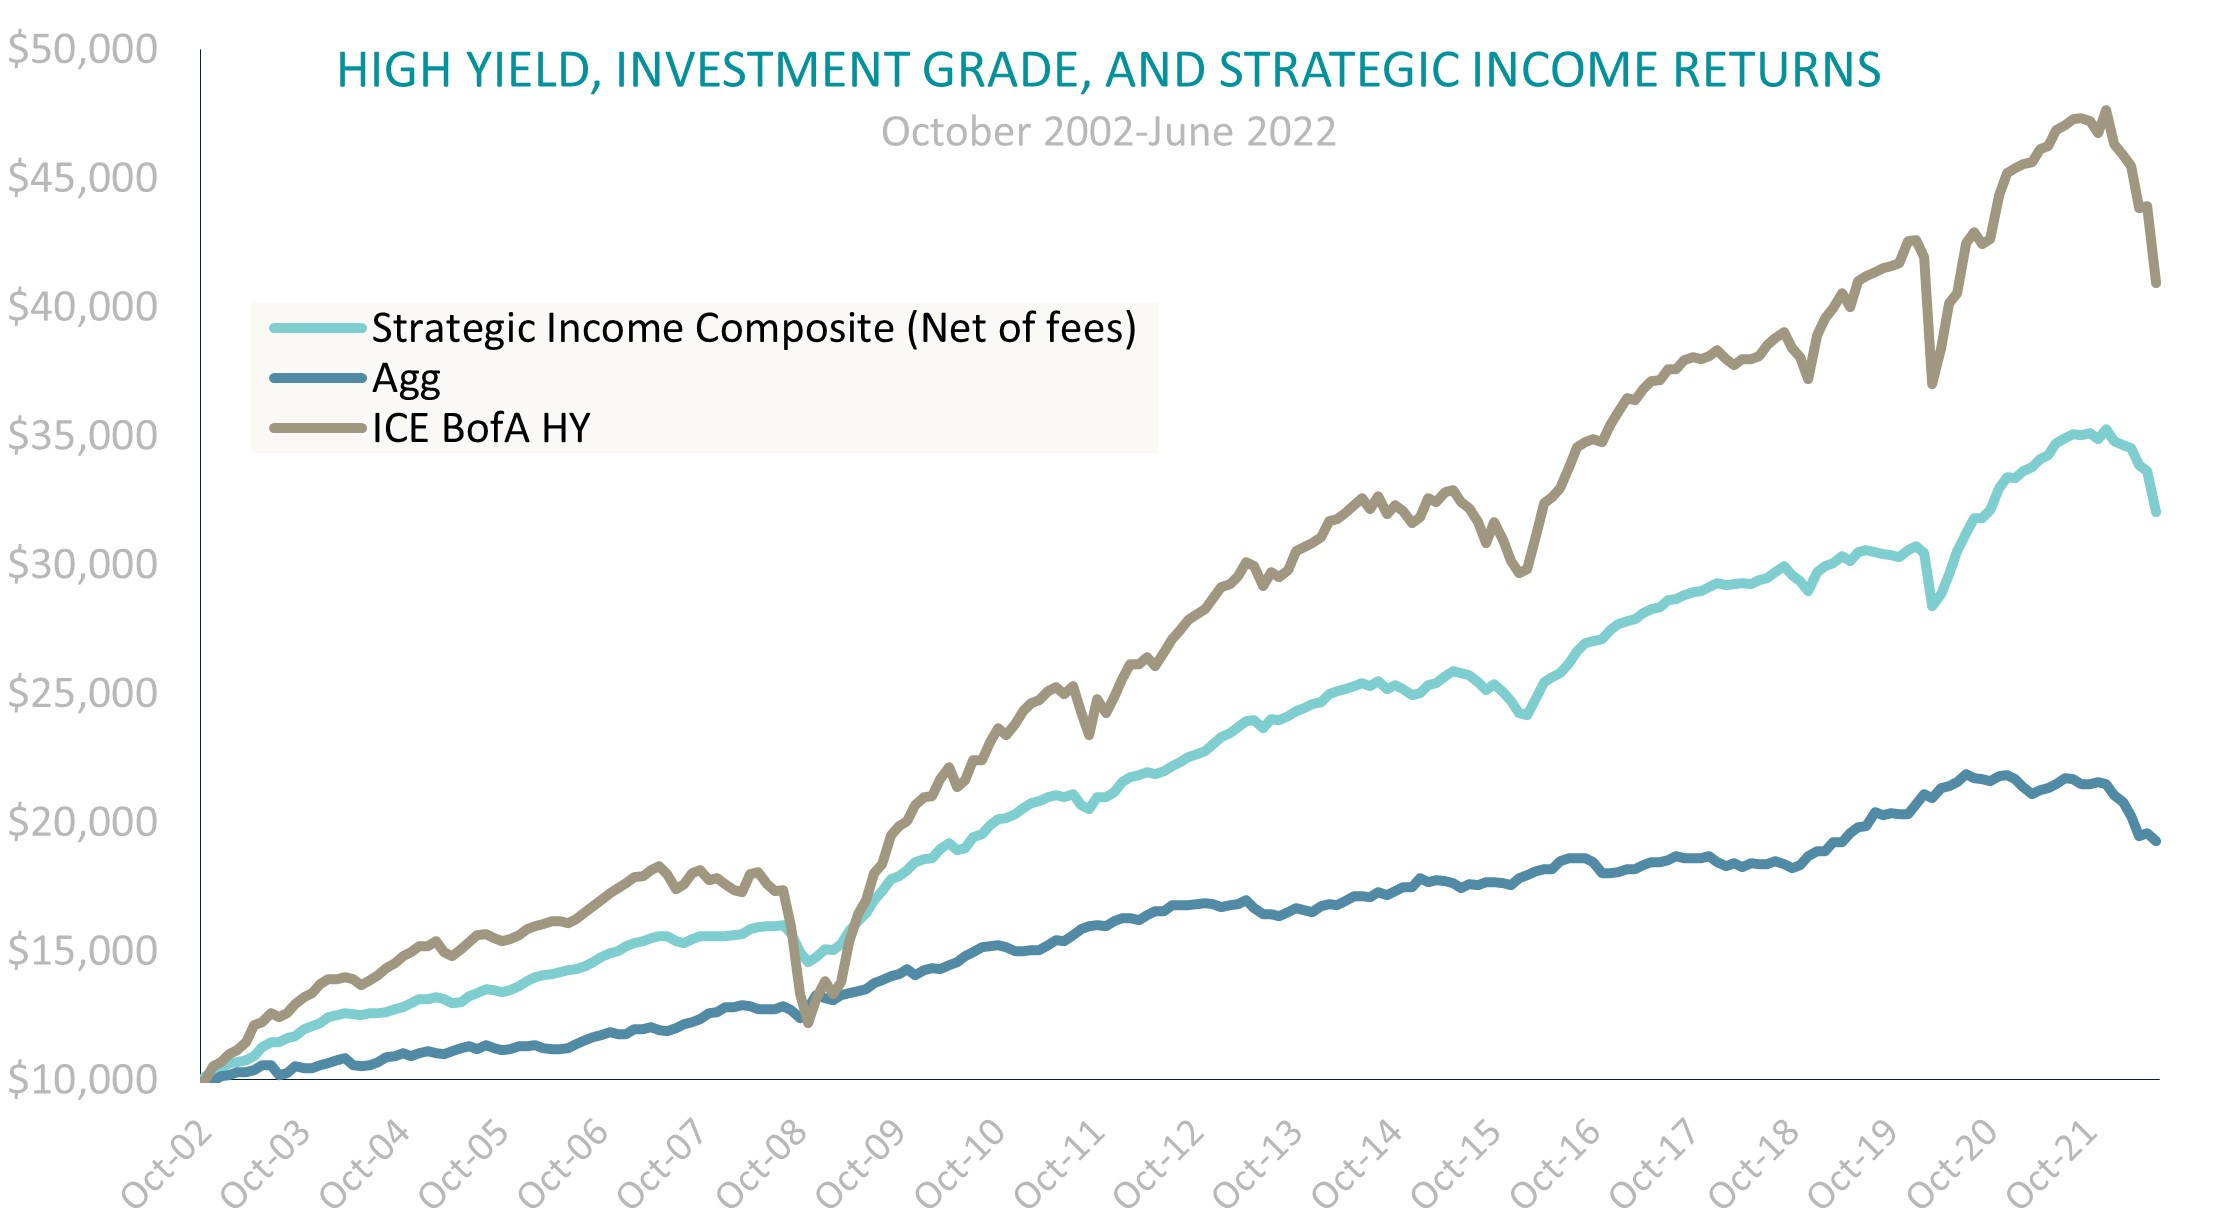 High Yield Investment Grade Strategic Income Returns Chart